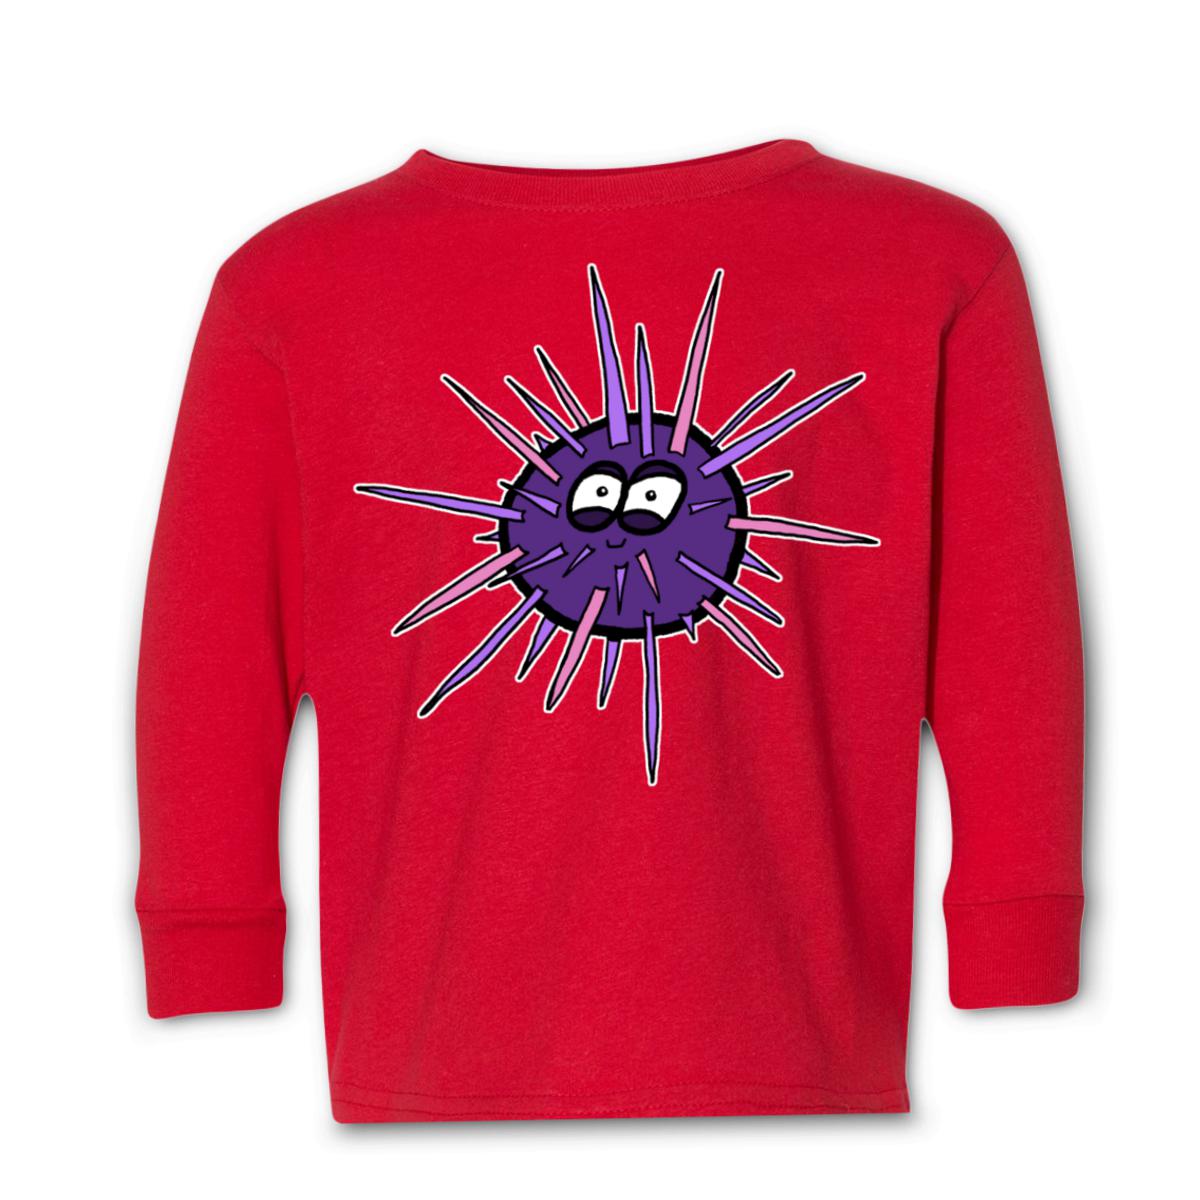 Sea Urchin Toddler Long Sleeve Tee 56T red